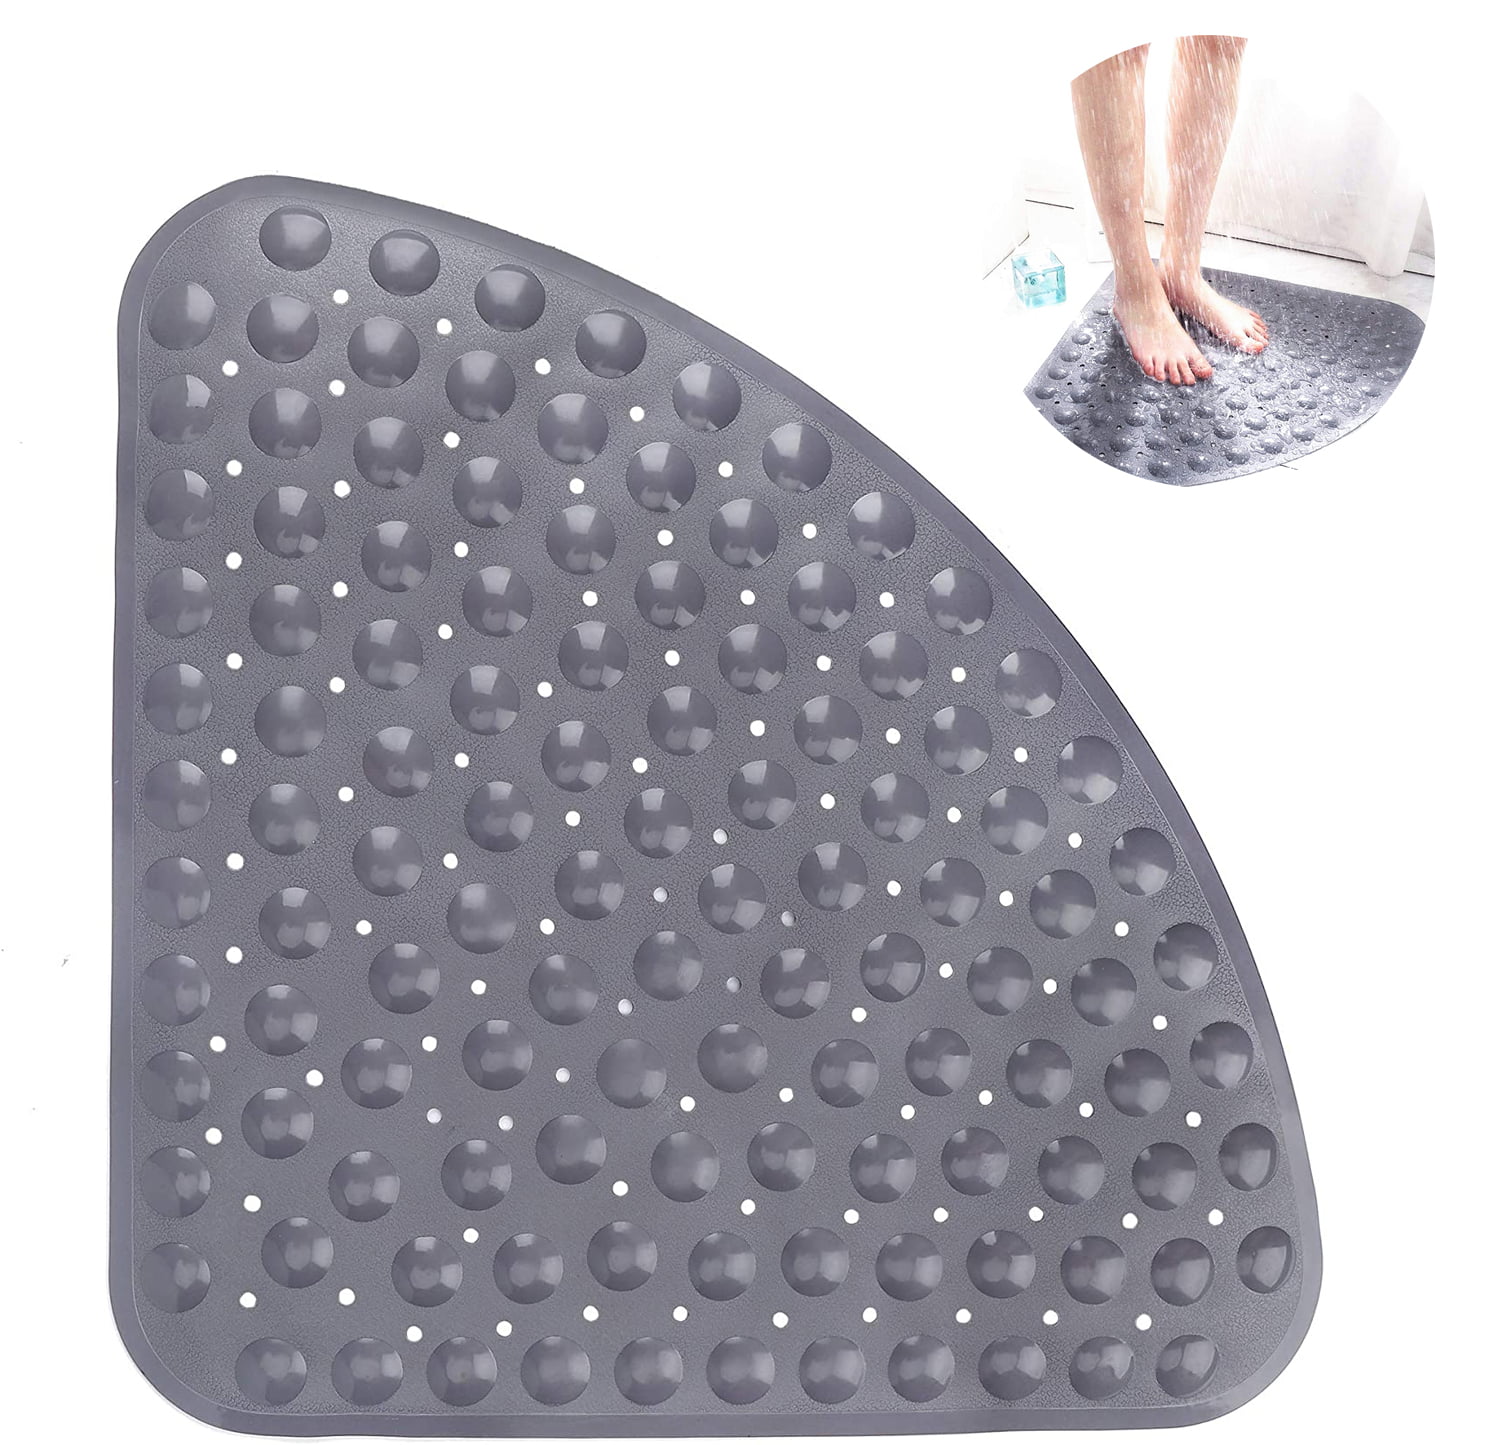 Waroomhouse Non-slip Bathroom Mat Tpe Suction Cup Bath Rug Waterproof  Non-slip Bath Mat with Suction Cups Easy to Drainable Durable Shower Pad  for Comfortable 